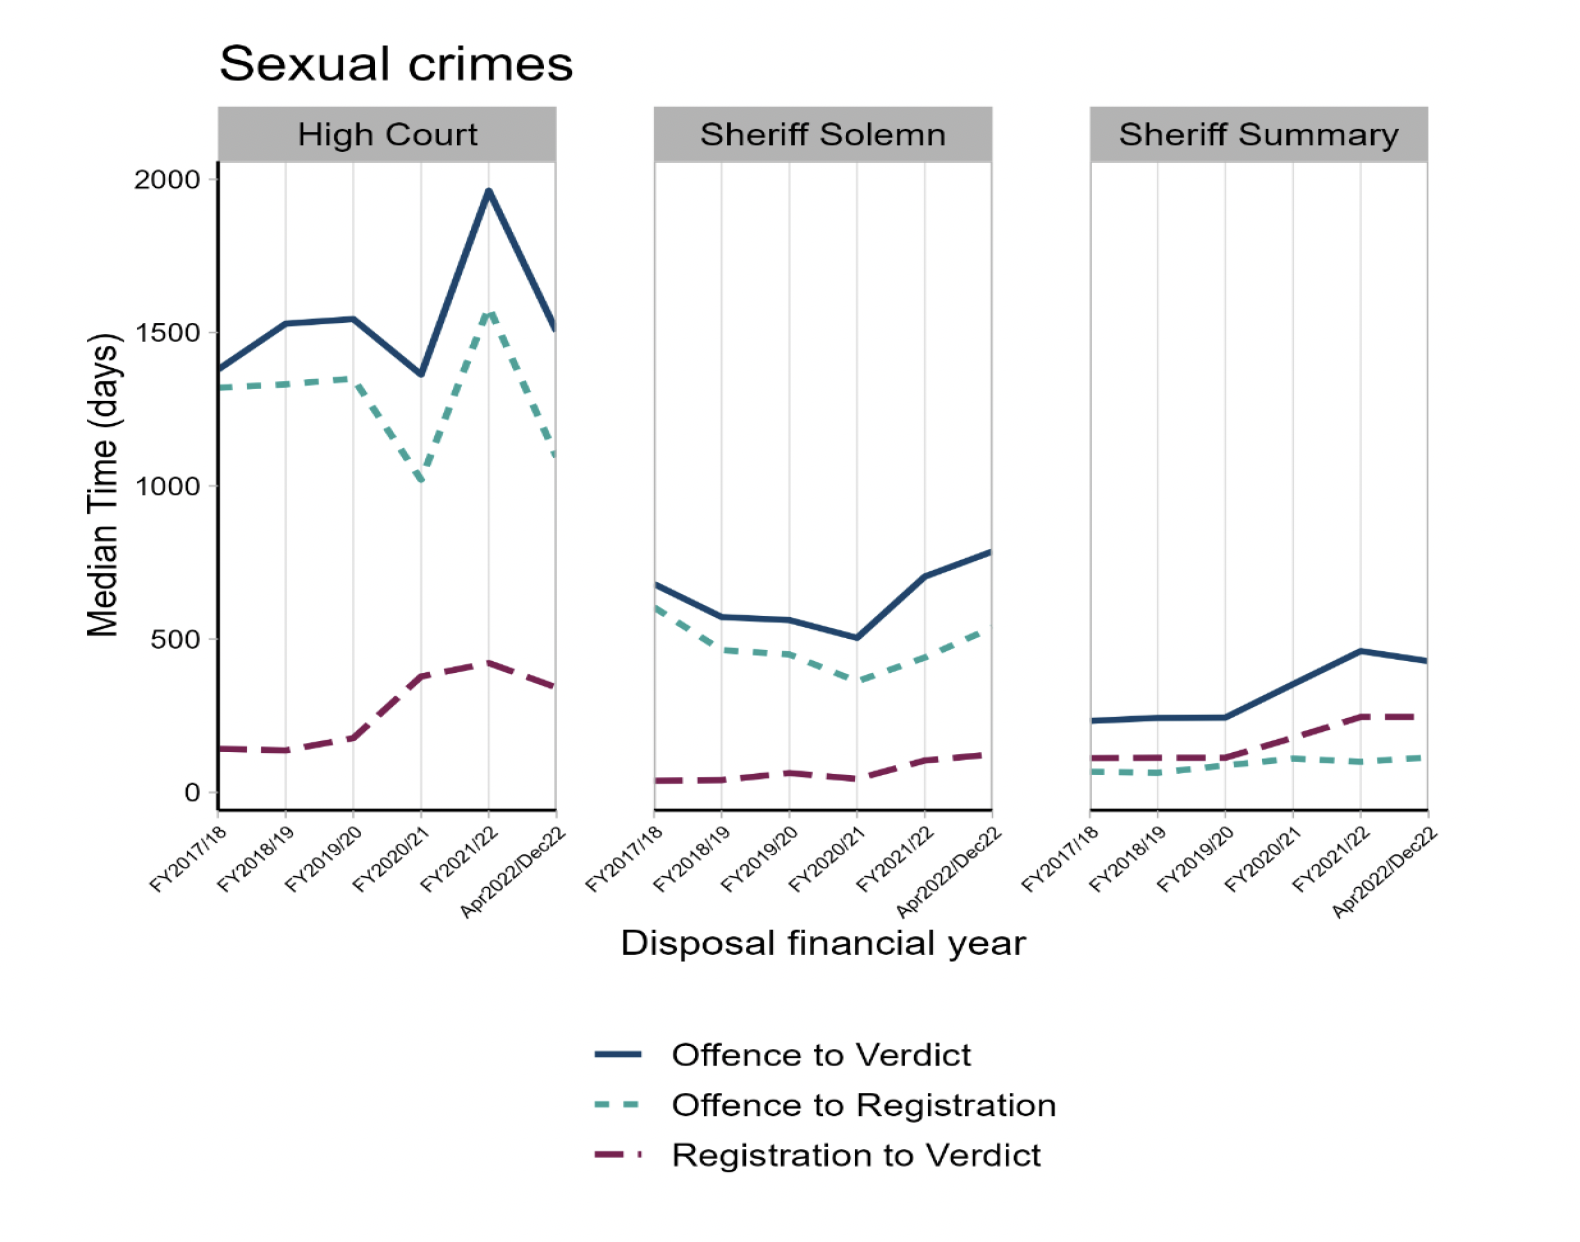 Figure 7: Three line charts showing offence to verdict, offence to registration and registration to verdict median times for accused with sexual crimes in High Court, Sheriff Solemn and Sheriff Summary showing that times have increased since the beginning of COVID-19 pandemic.